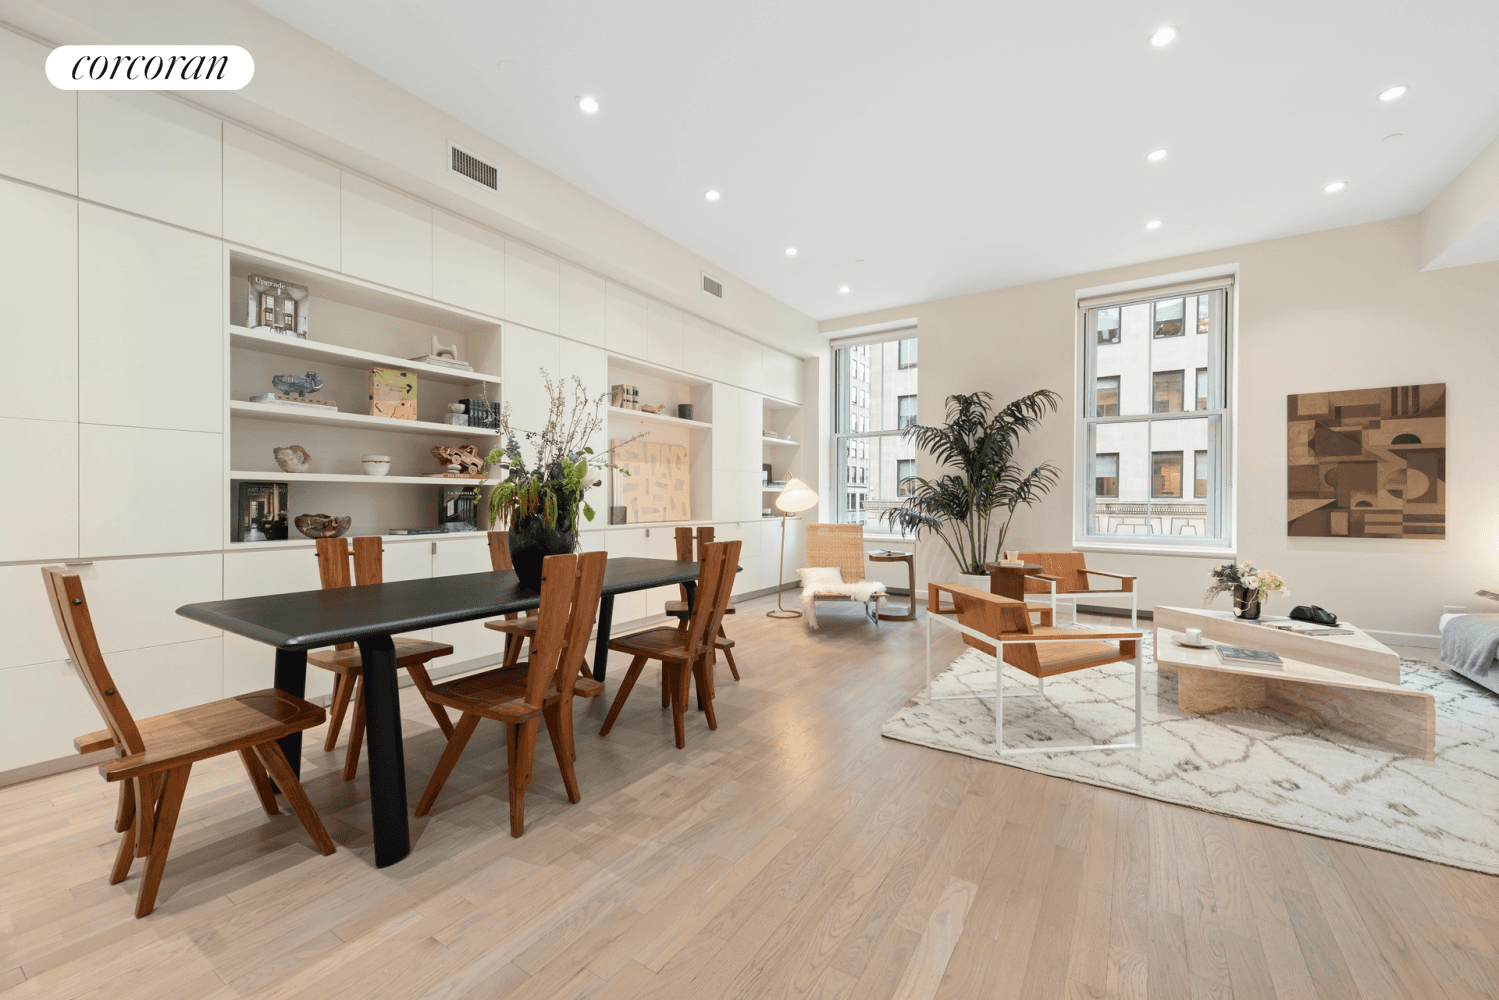 This exquisite four bedroom, three bathroom loft embraces a chic contemporary aesthetic within the bones of a classic Tribeca loft to create a bright and airy layout with premium finishes ...